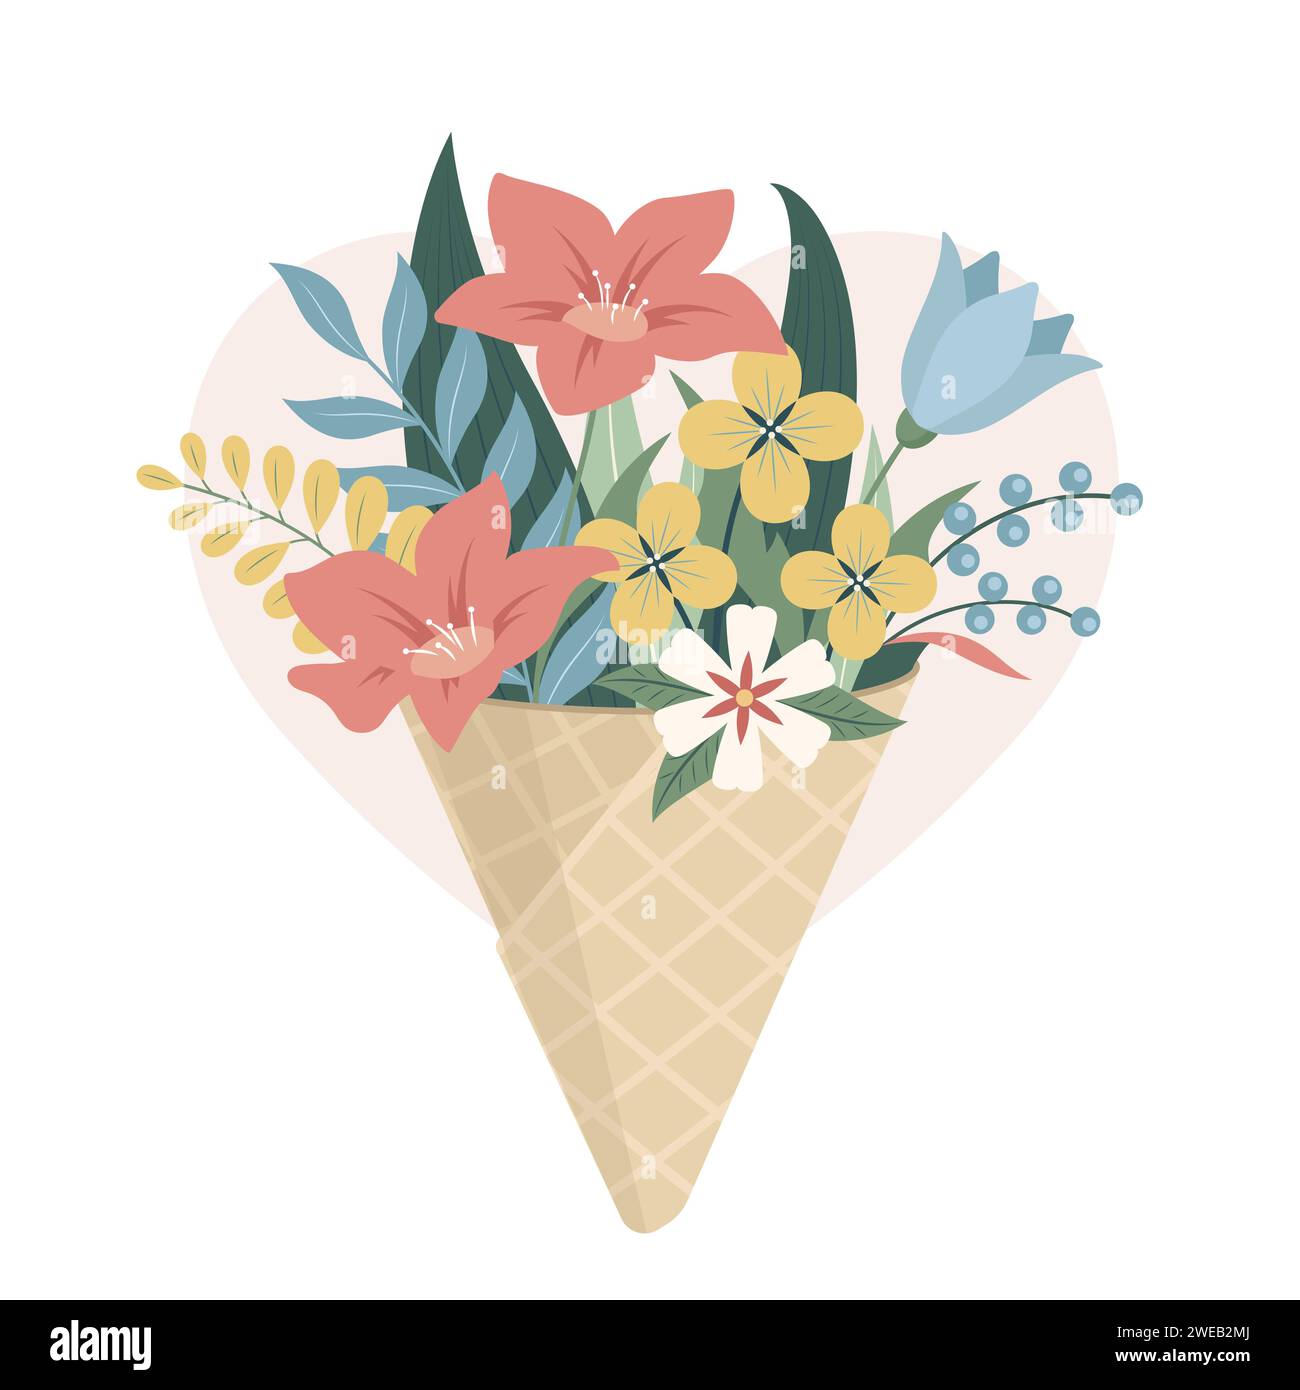 Flower bouquet in an ice cream cone on a heart-shaped background Stock Vector